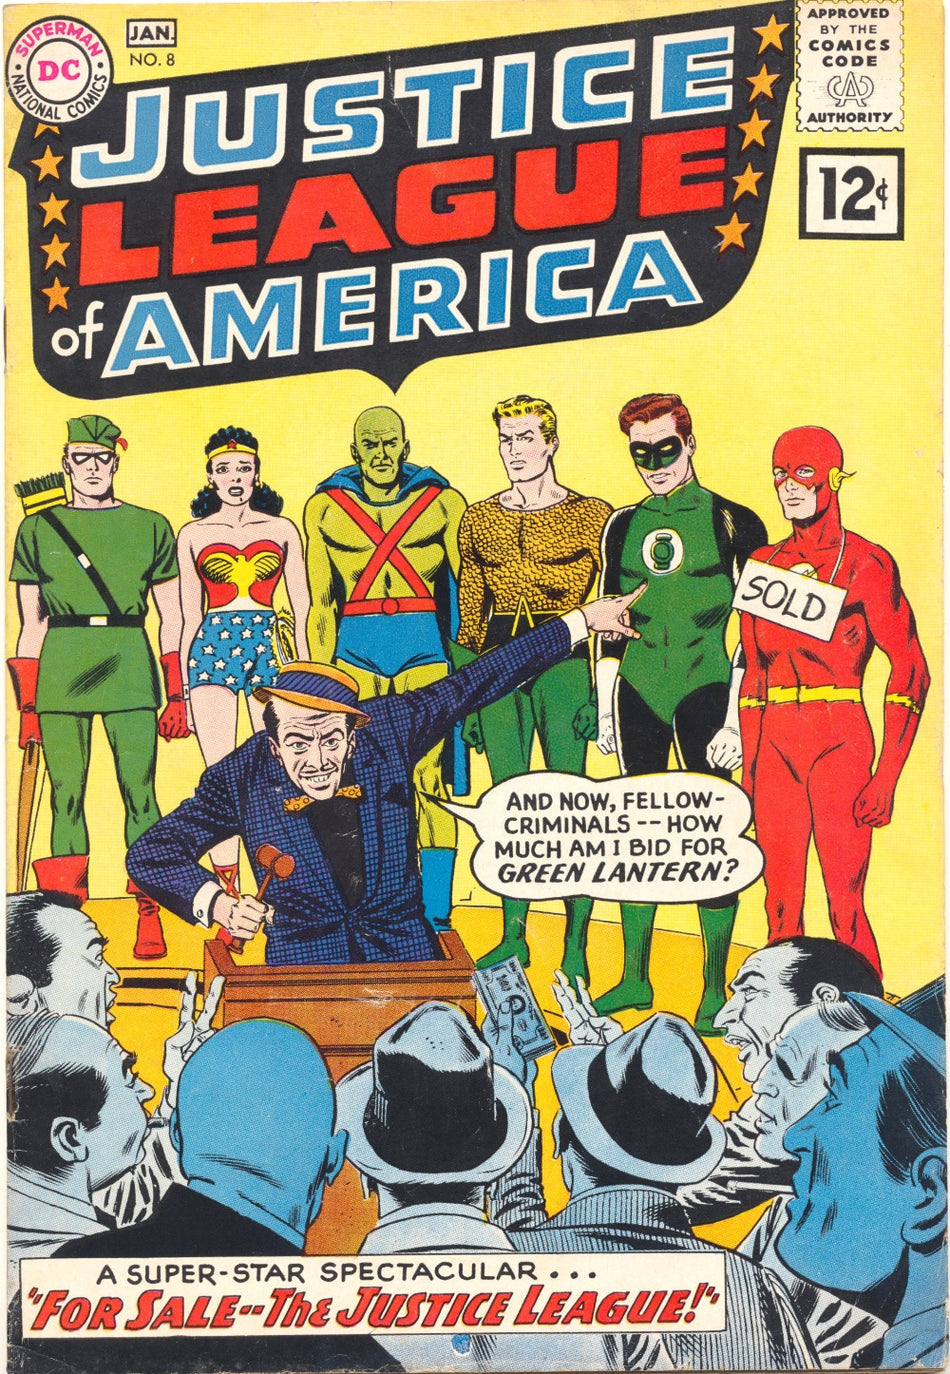 JUSTICE LEAGUE OF AMERICA 08 VG/FN (5.0)